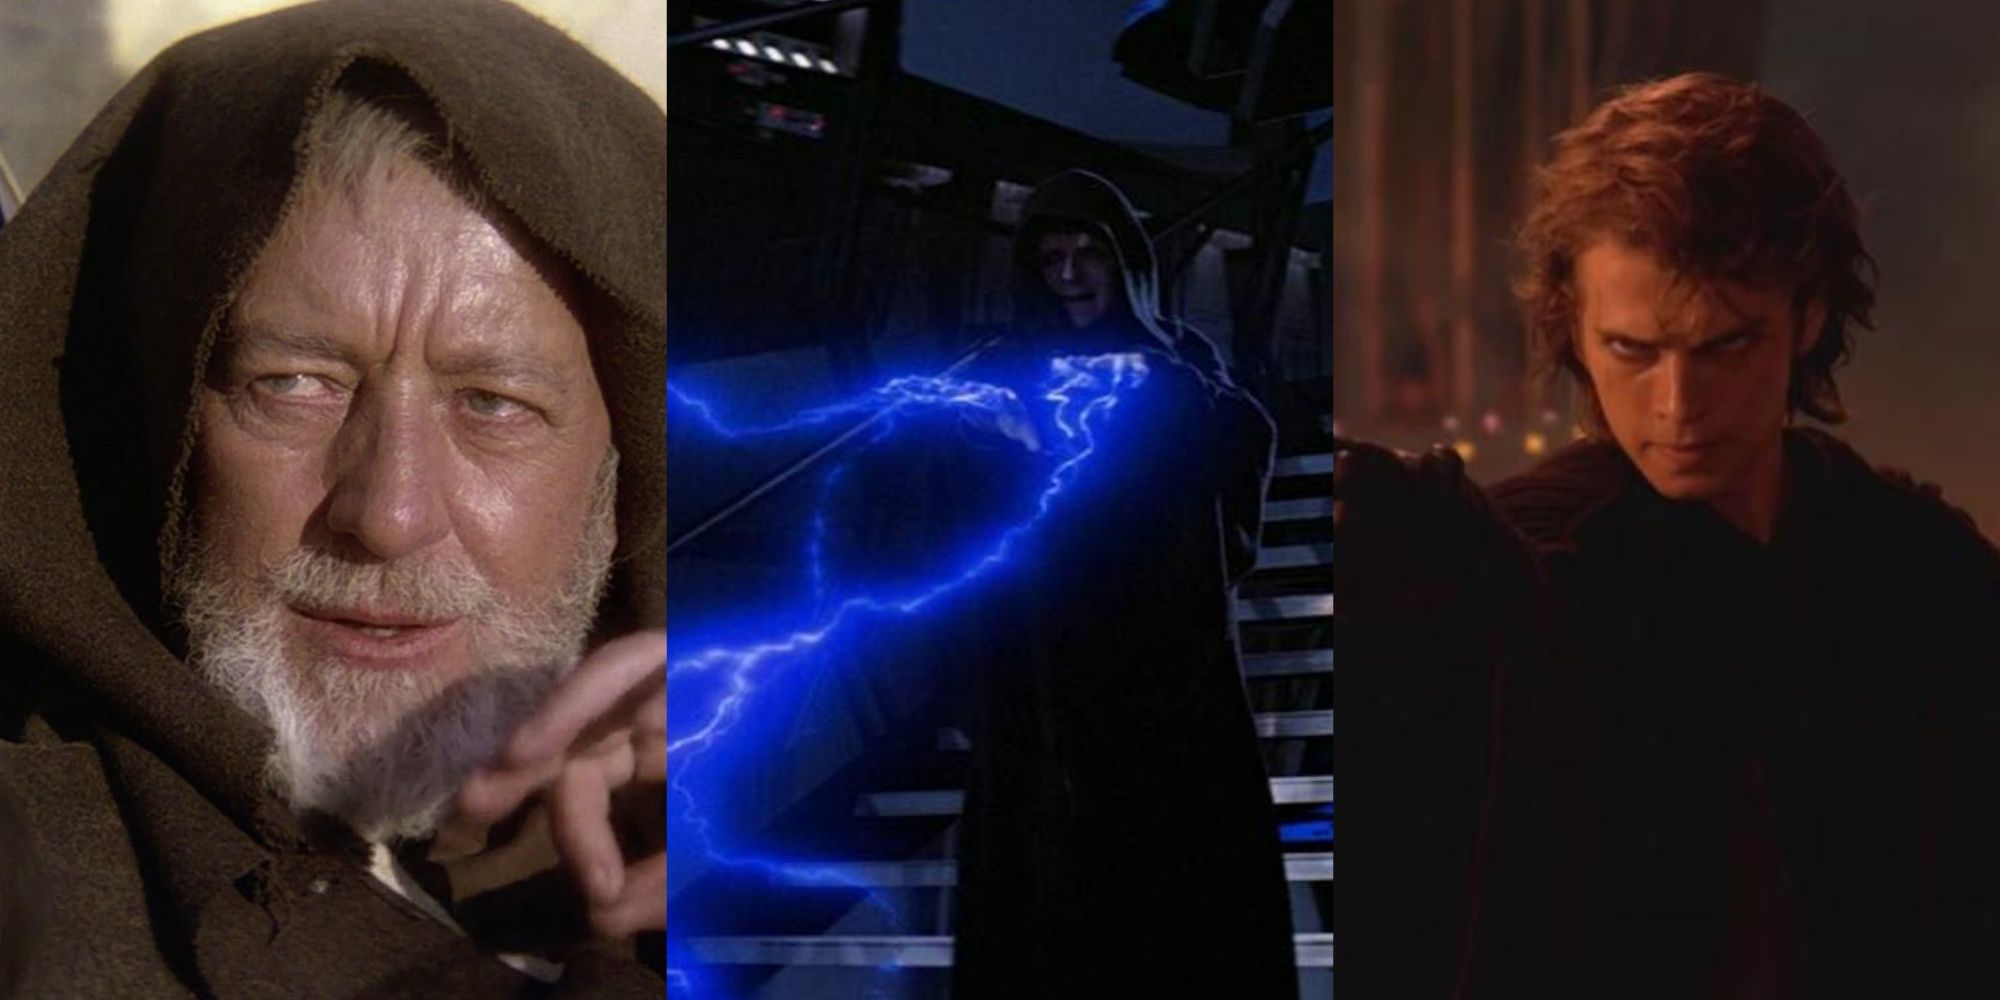 Jedi Mind trick, Force Lightning, and Force Choke being used by Obi Wan Kenobi, Palpatine, and Anakin Skywalker respectively.